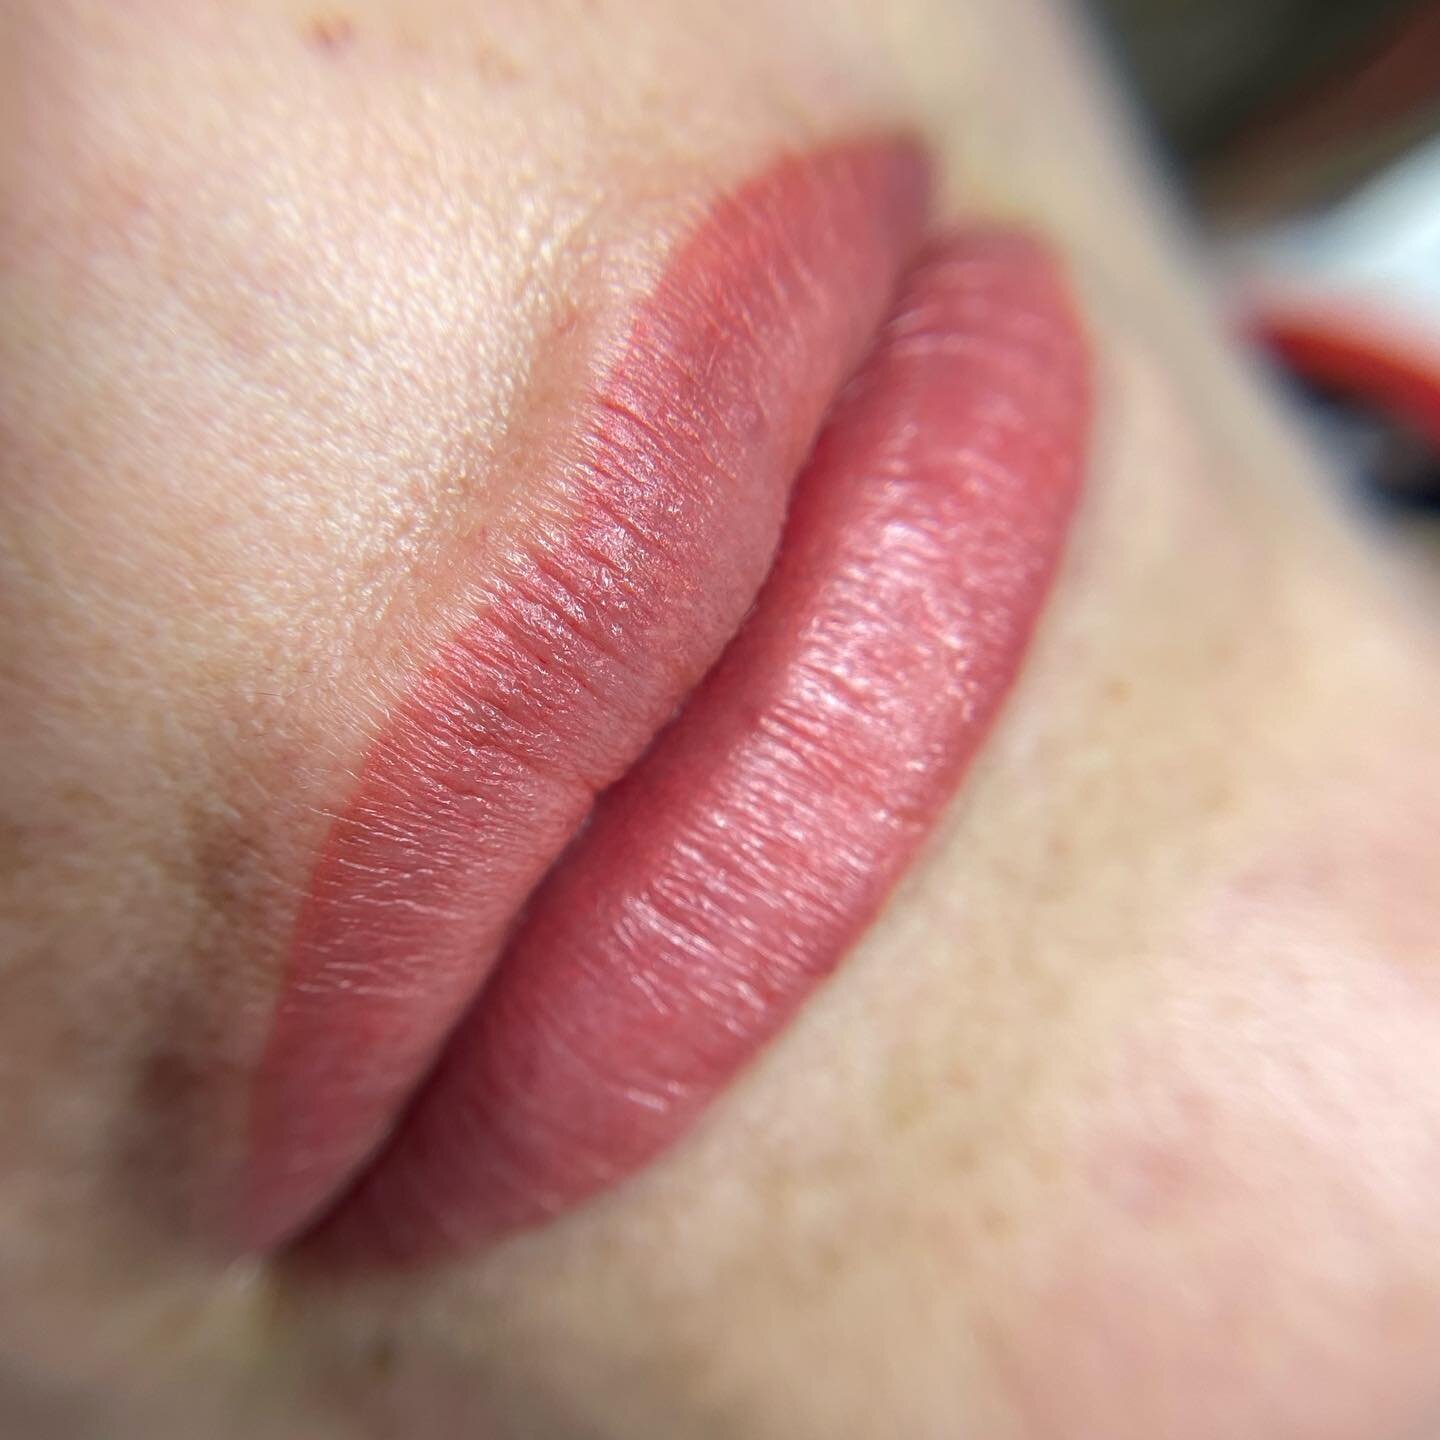 Mature skin lip blush 👄 fresh off the needle *and my camera roll* 

Swipe ⏩️ for her before!